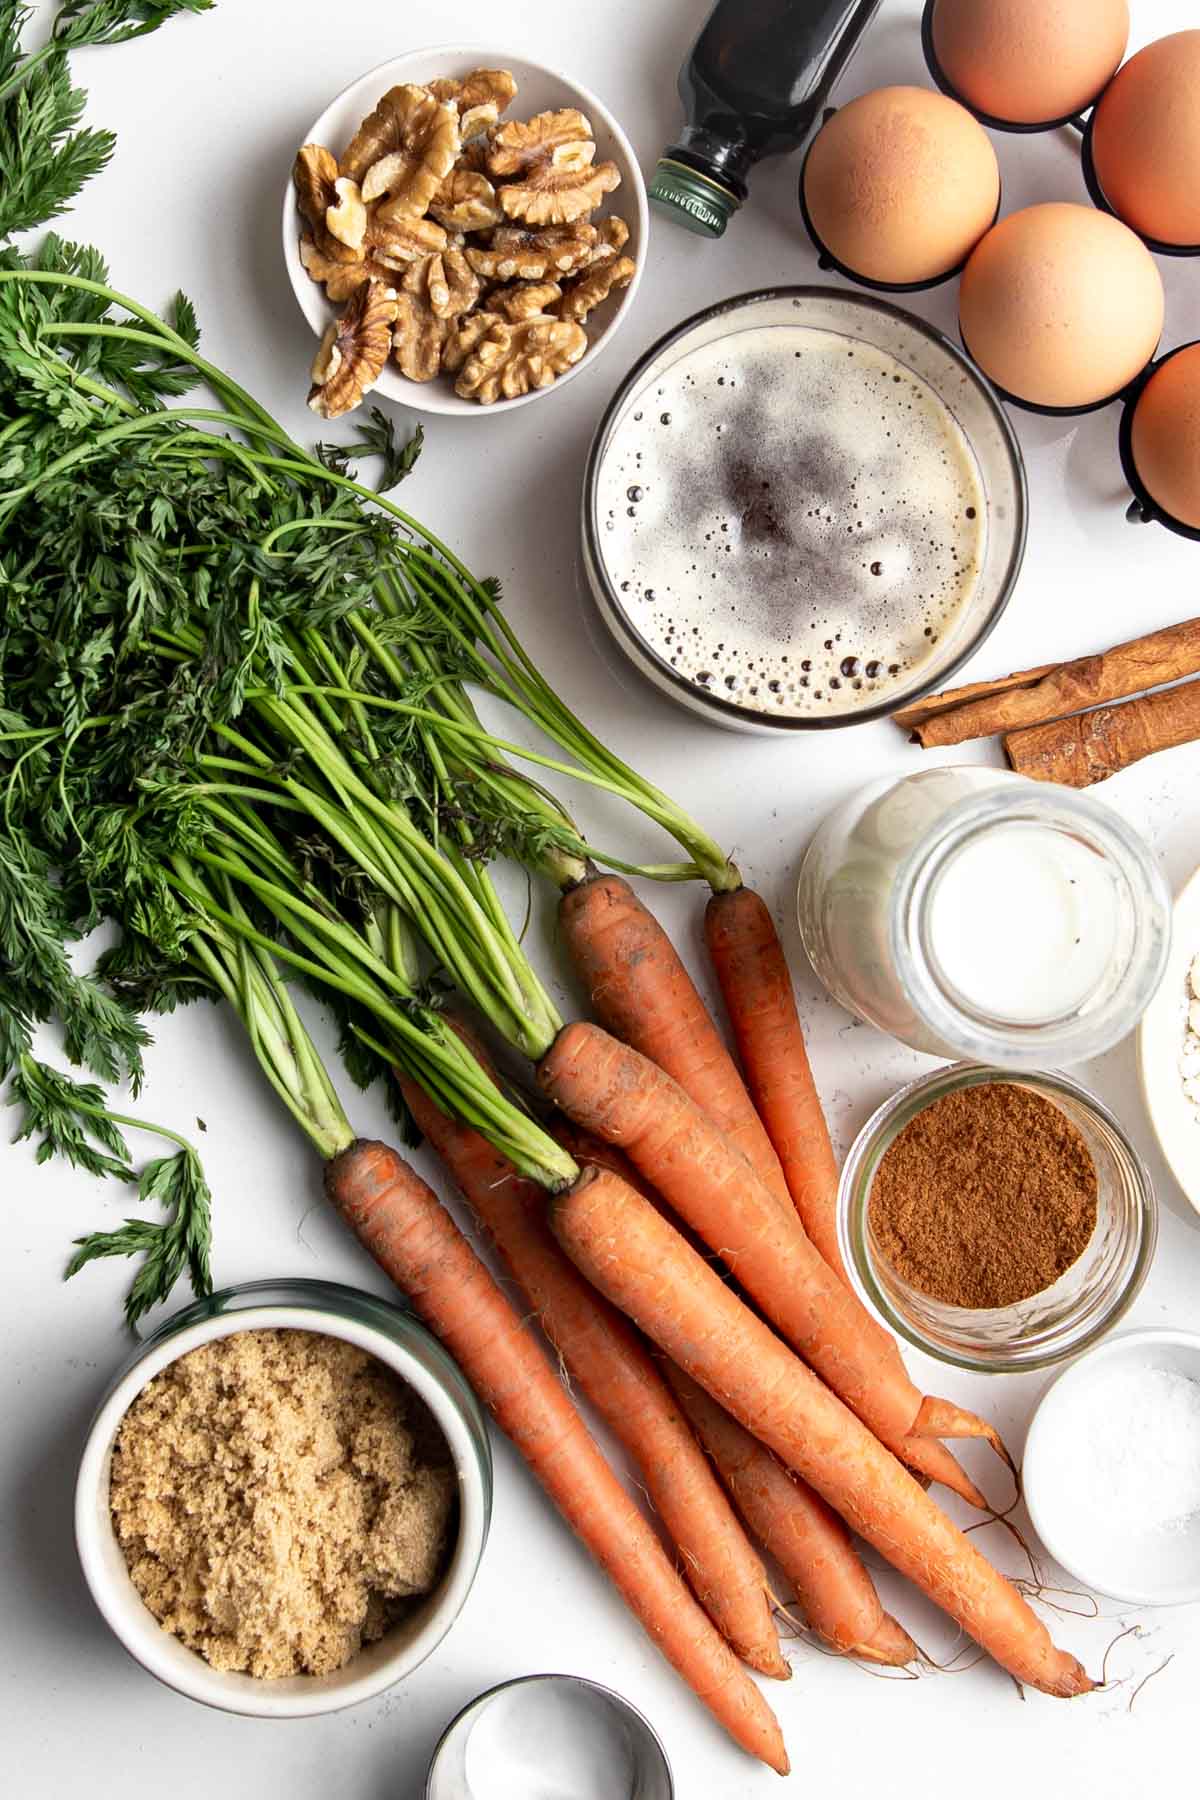 Ingredients to make Carrot Cake Muffins with Brown Butter Frosting